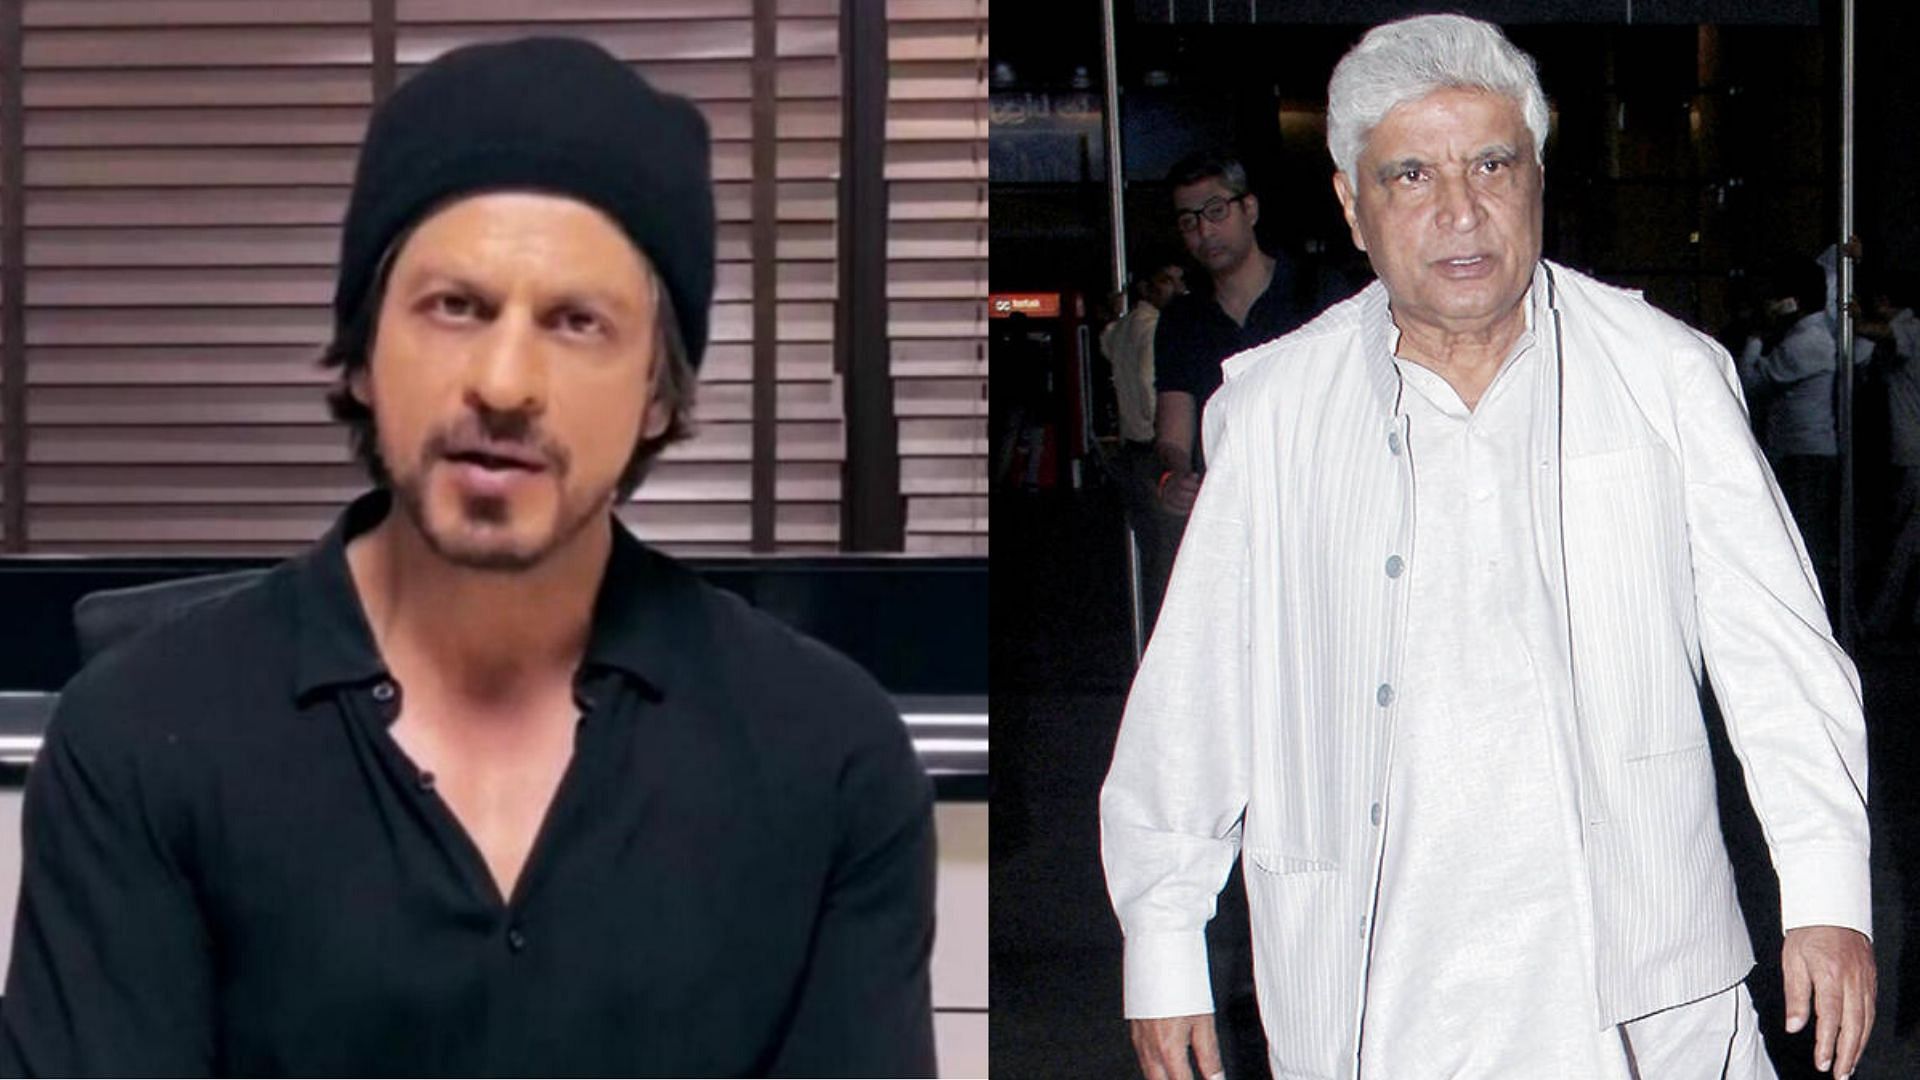 Shah Rukh Khan at One World: Together at Home Concert. Javed Akhtar’s message on communal disharmony.&nbsp;